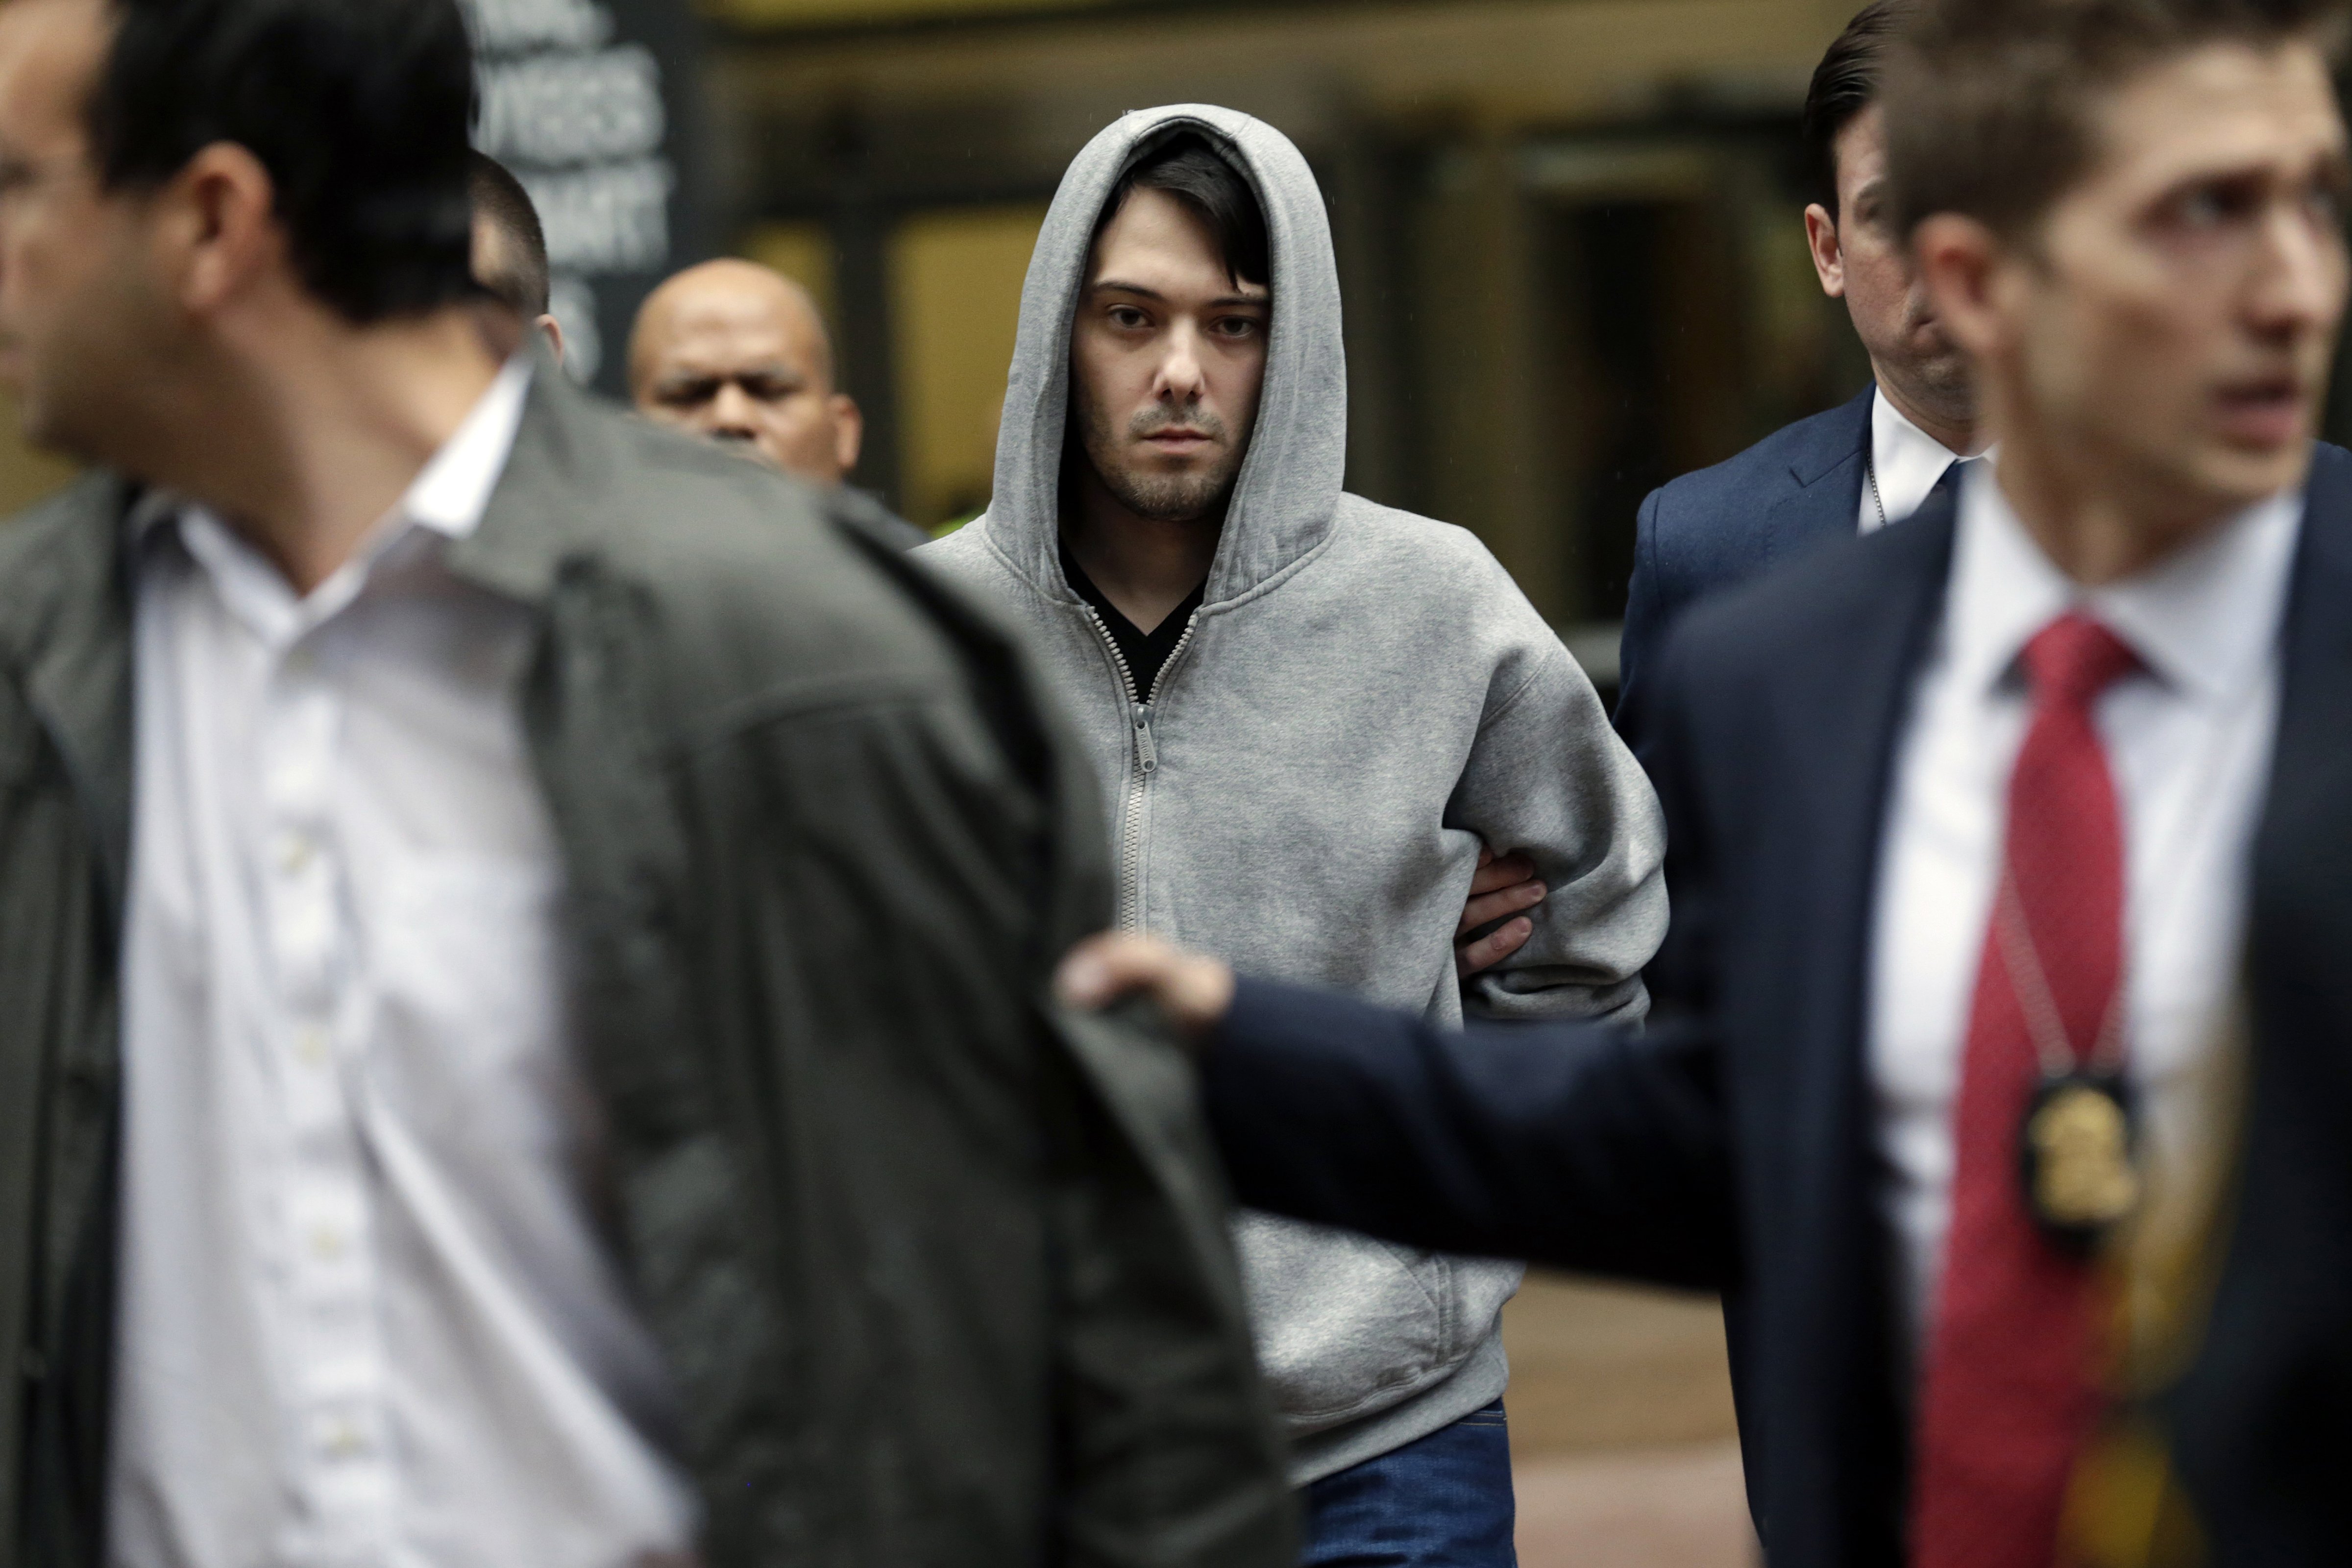 Martin Shkreli, chief executive officer of Turing Pharmaceuticals, center, exits federal court in New York City on Dec. 17, 2015 (Peter Foley—Bloomberg/Getty Images)